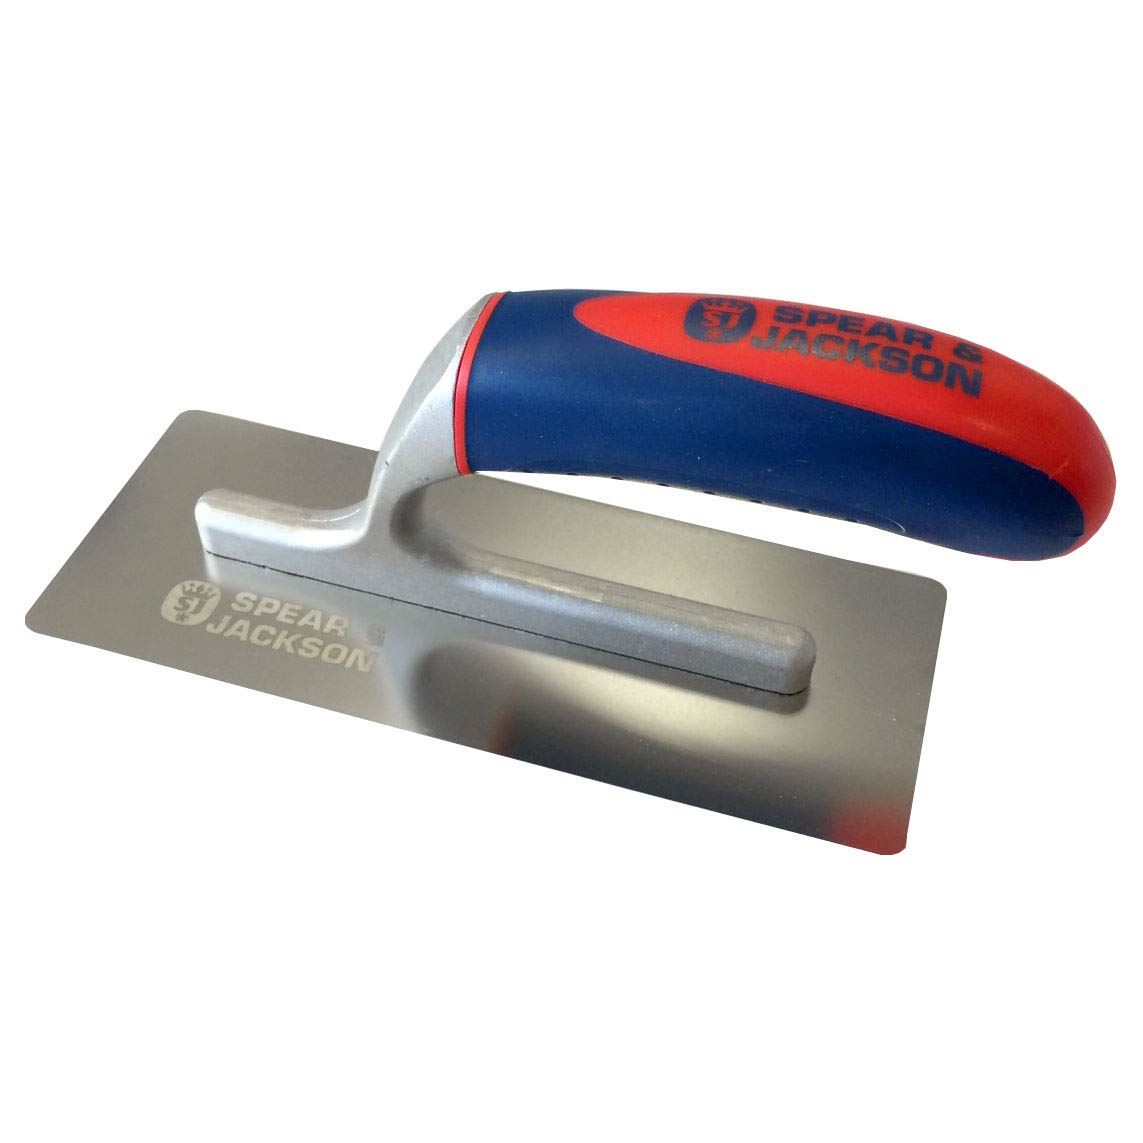 Spear & Jackson 10613SF/14 S/F HDL Stainless Plastering Trowel, Blue, 13-Inch